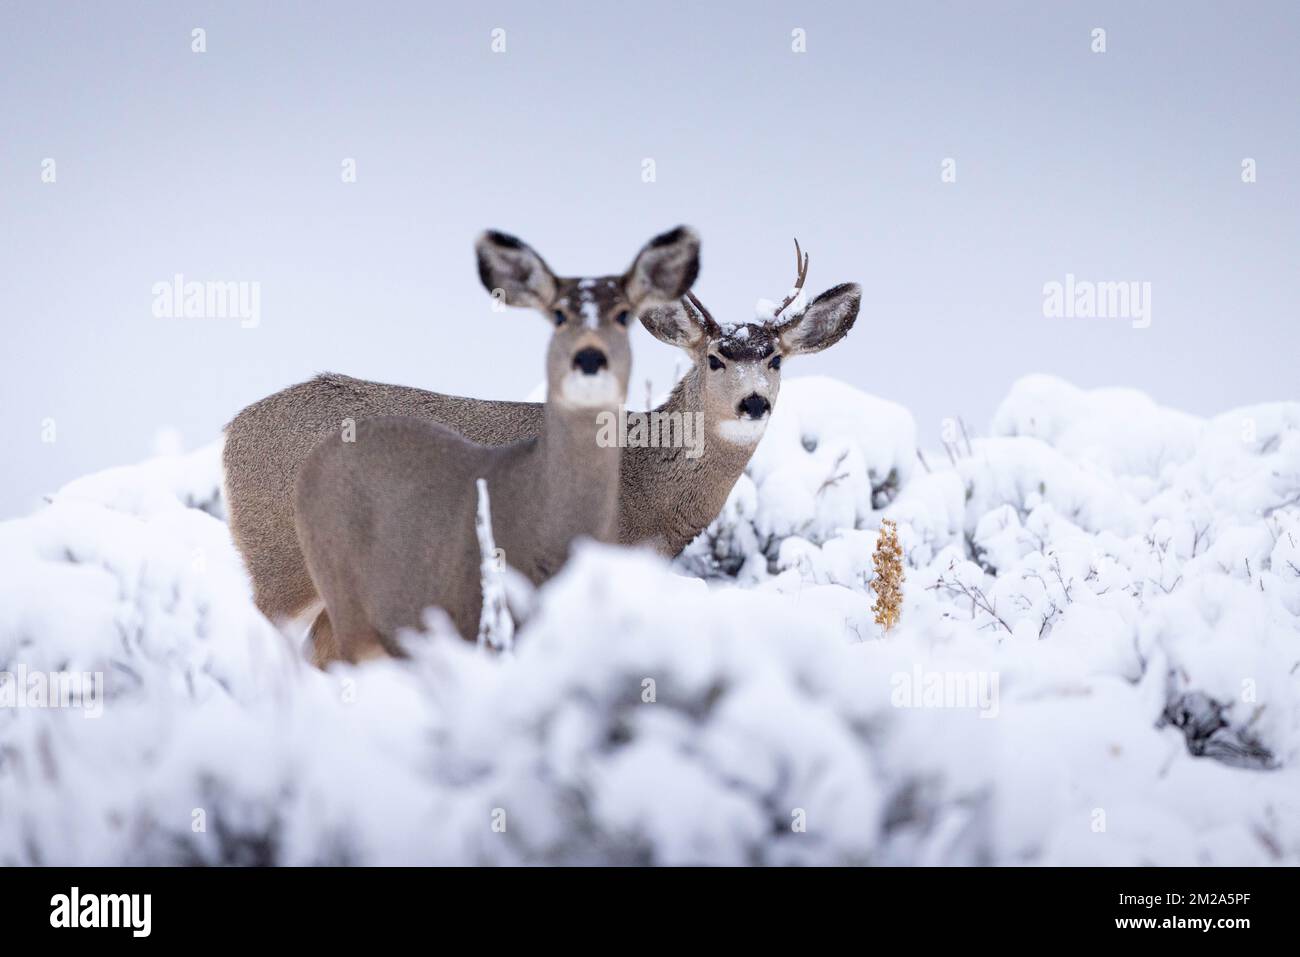 A mule deer buck standing behind a doe in a snow-covered landscape on Antelope Flats. Grand Teton National Park, Wyoming Stock Photo